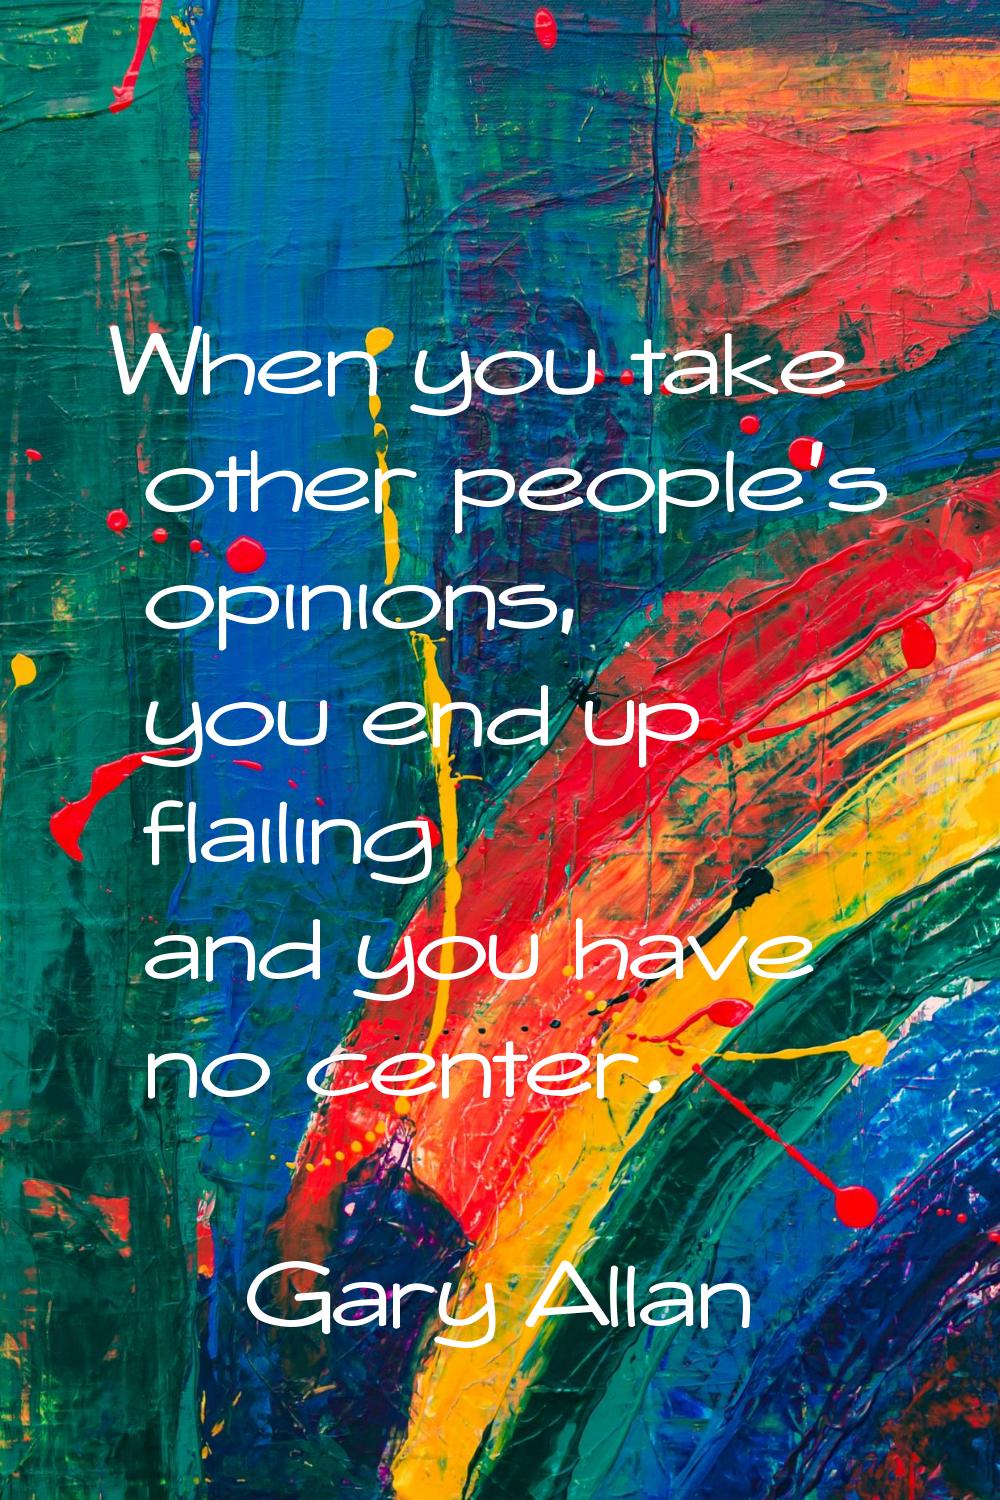 When you take other people's opinions, you end up flailing and you have no center.